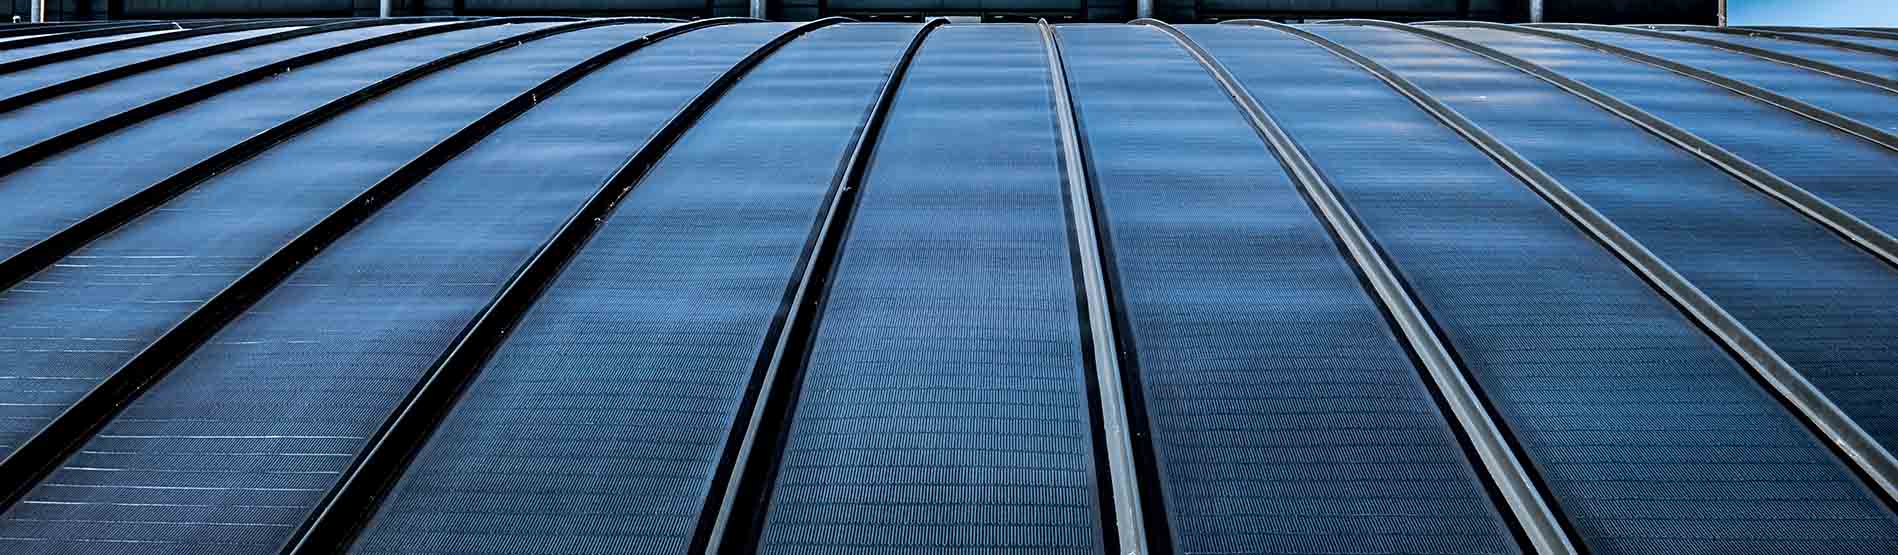 solar panel roof of active building